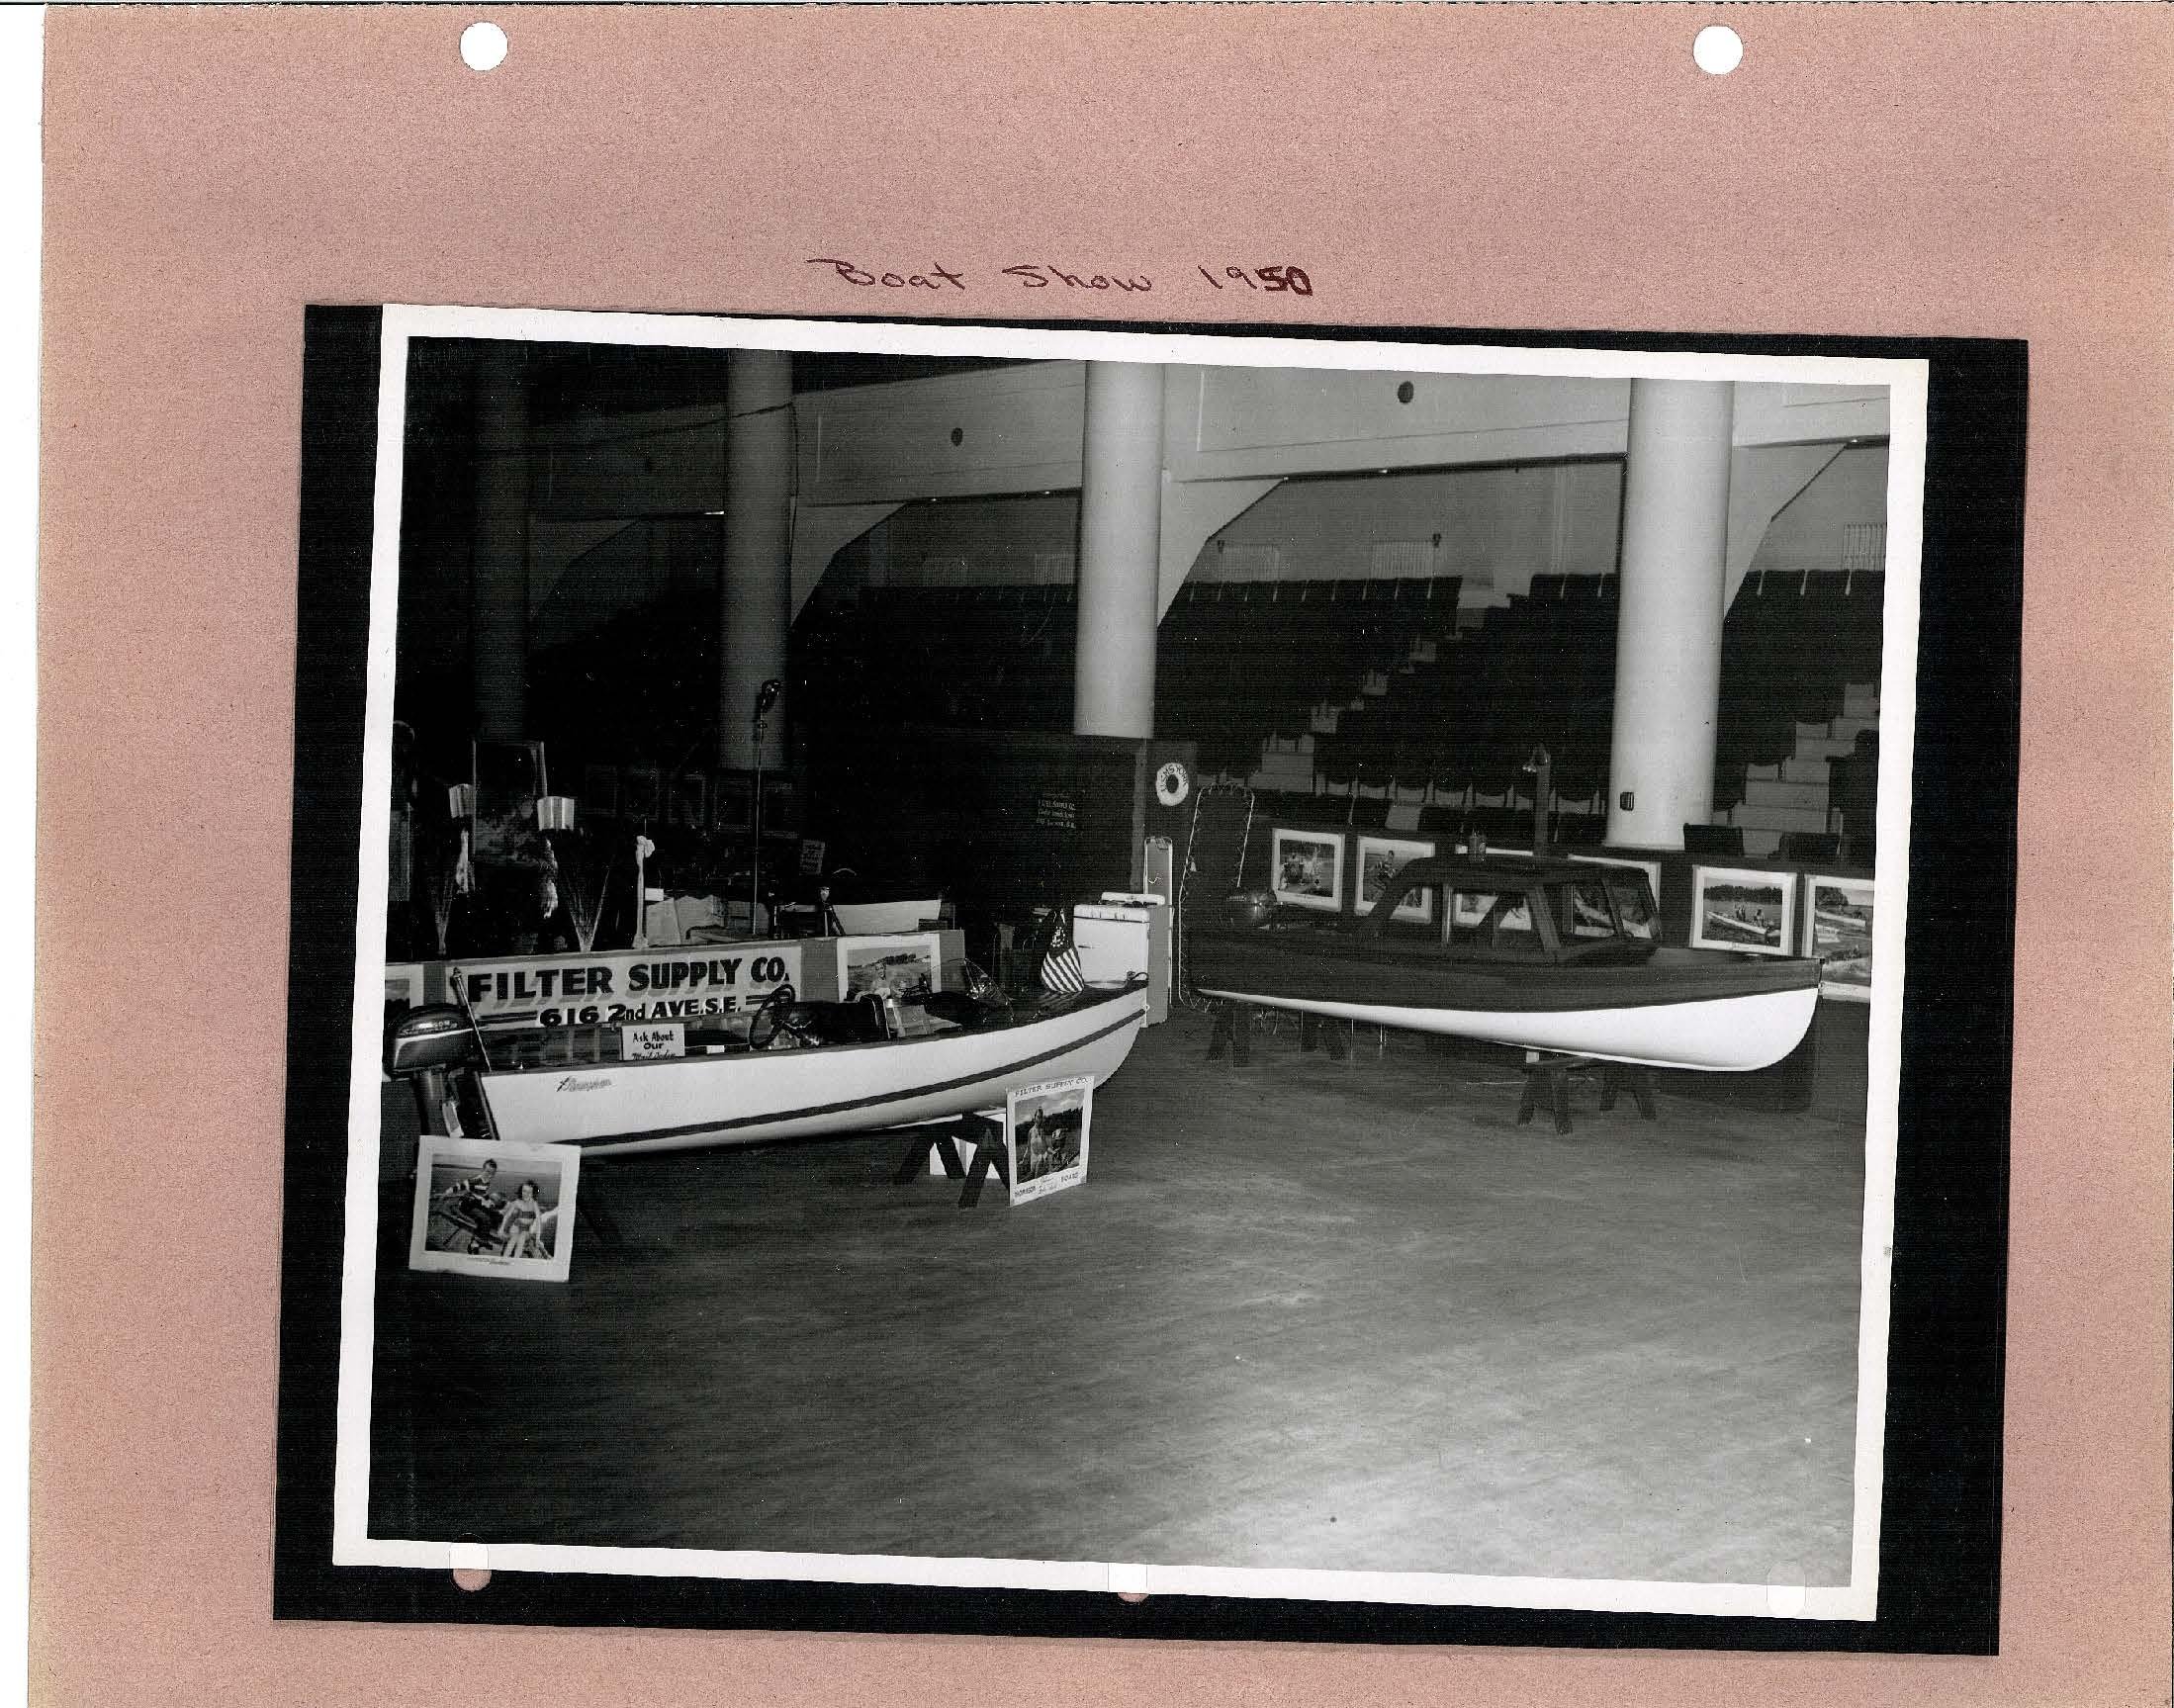 Photo taken at Boat show 1950 of small boats